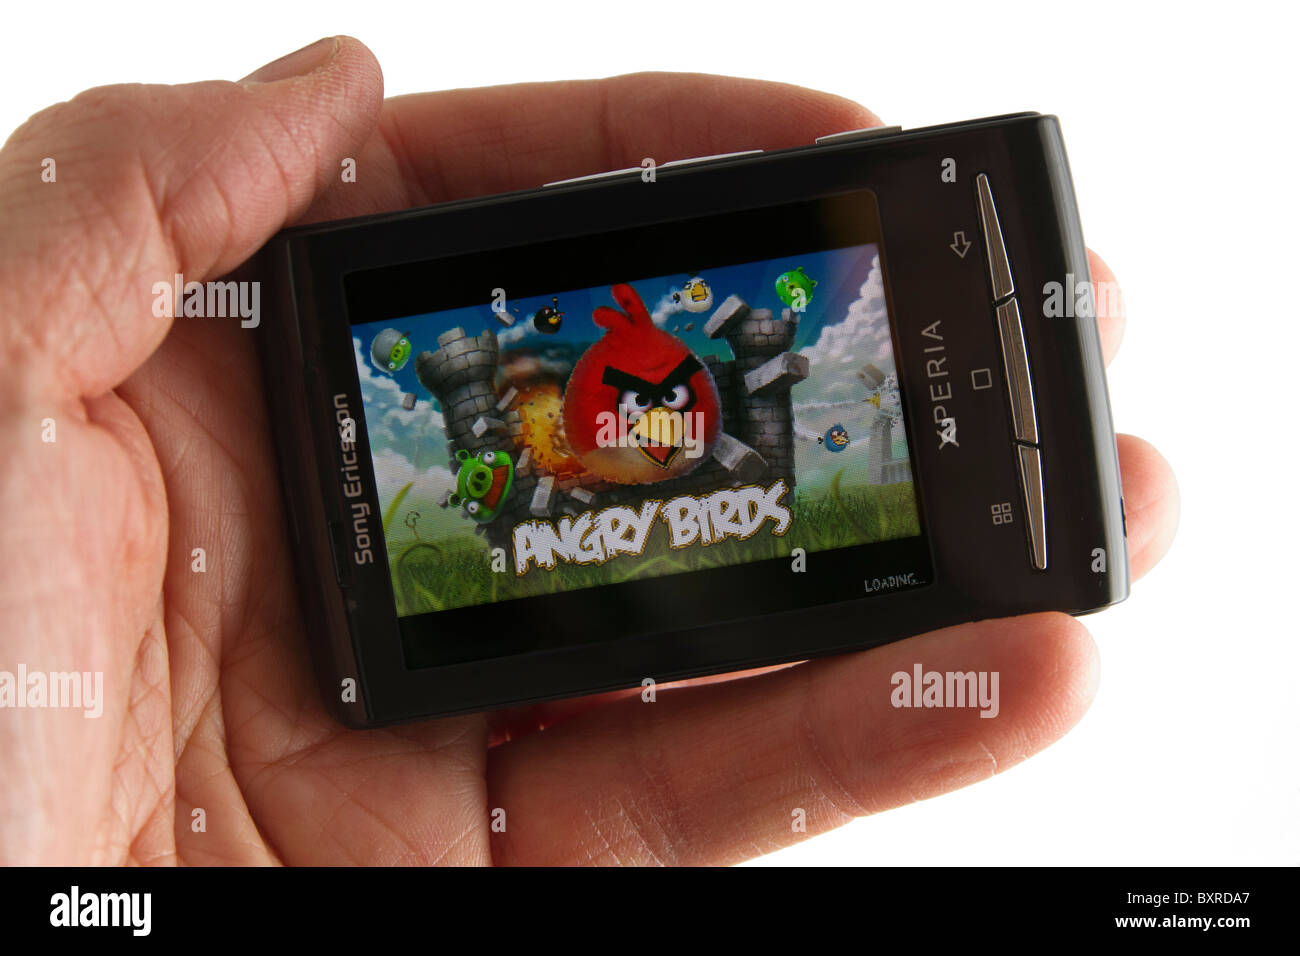 Hand holding the Android phone Sony Ericsson Xperia X10 mini, showing the  smash-hit game Angry Birds, by Rovio Stock Photo - Alamy